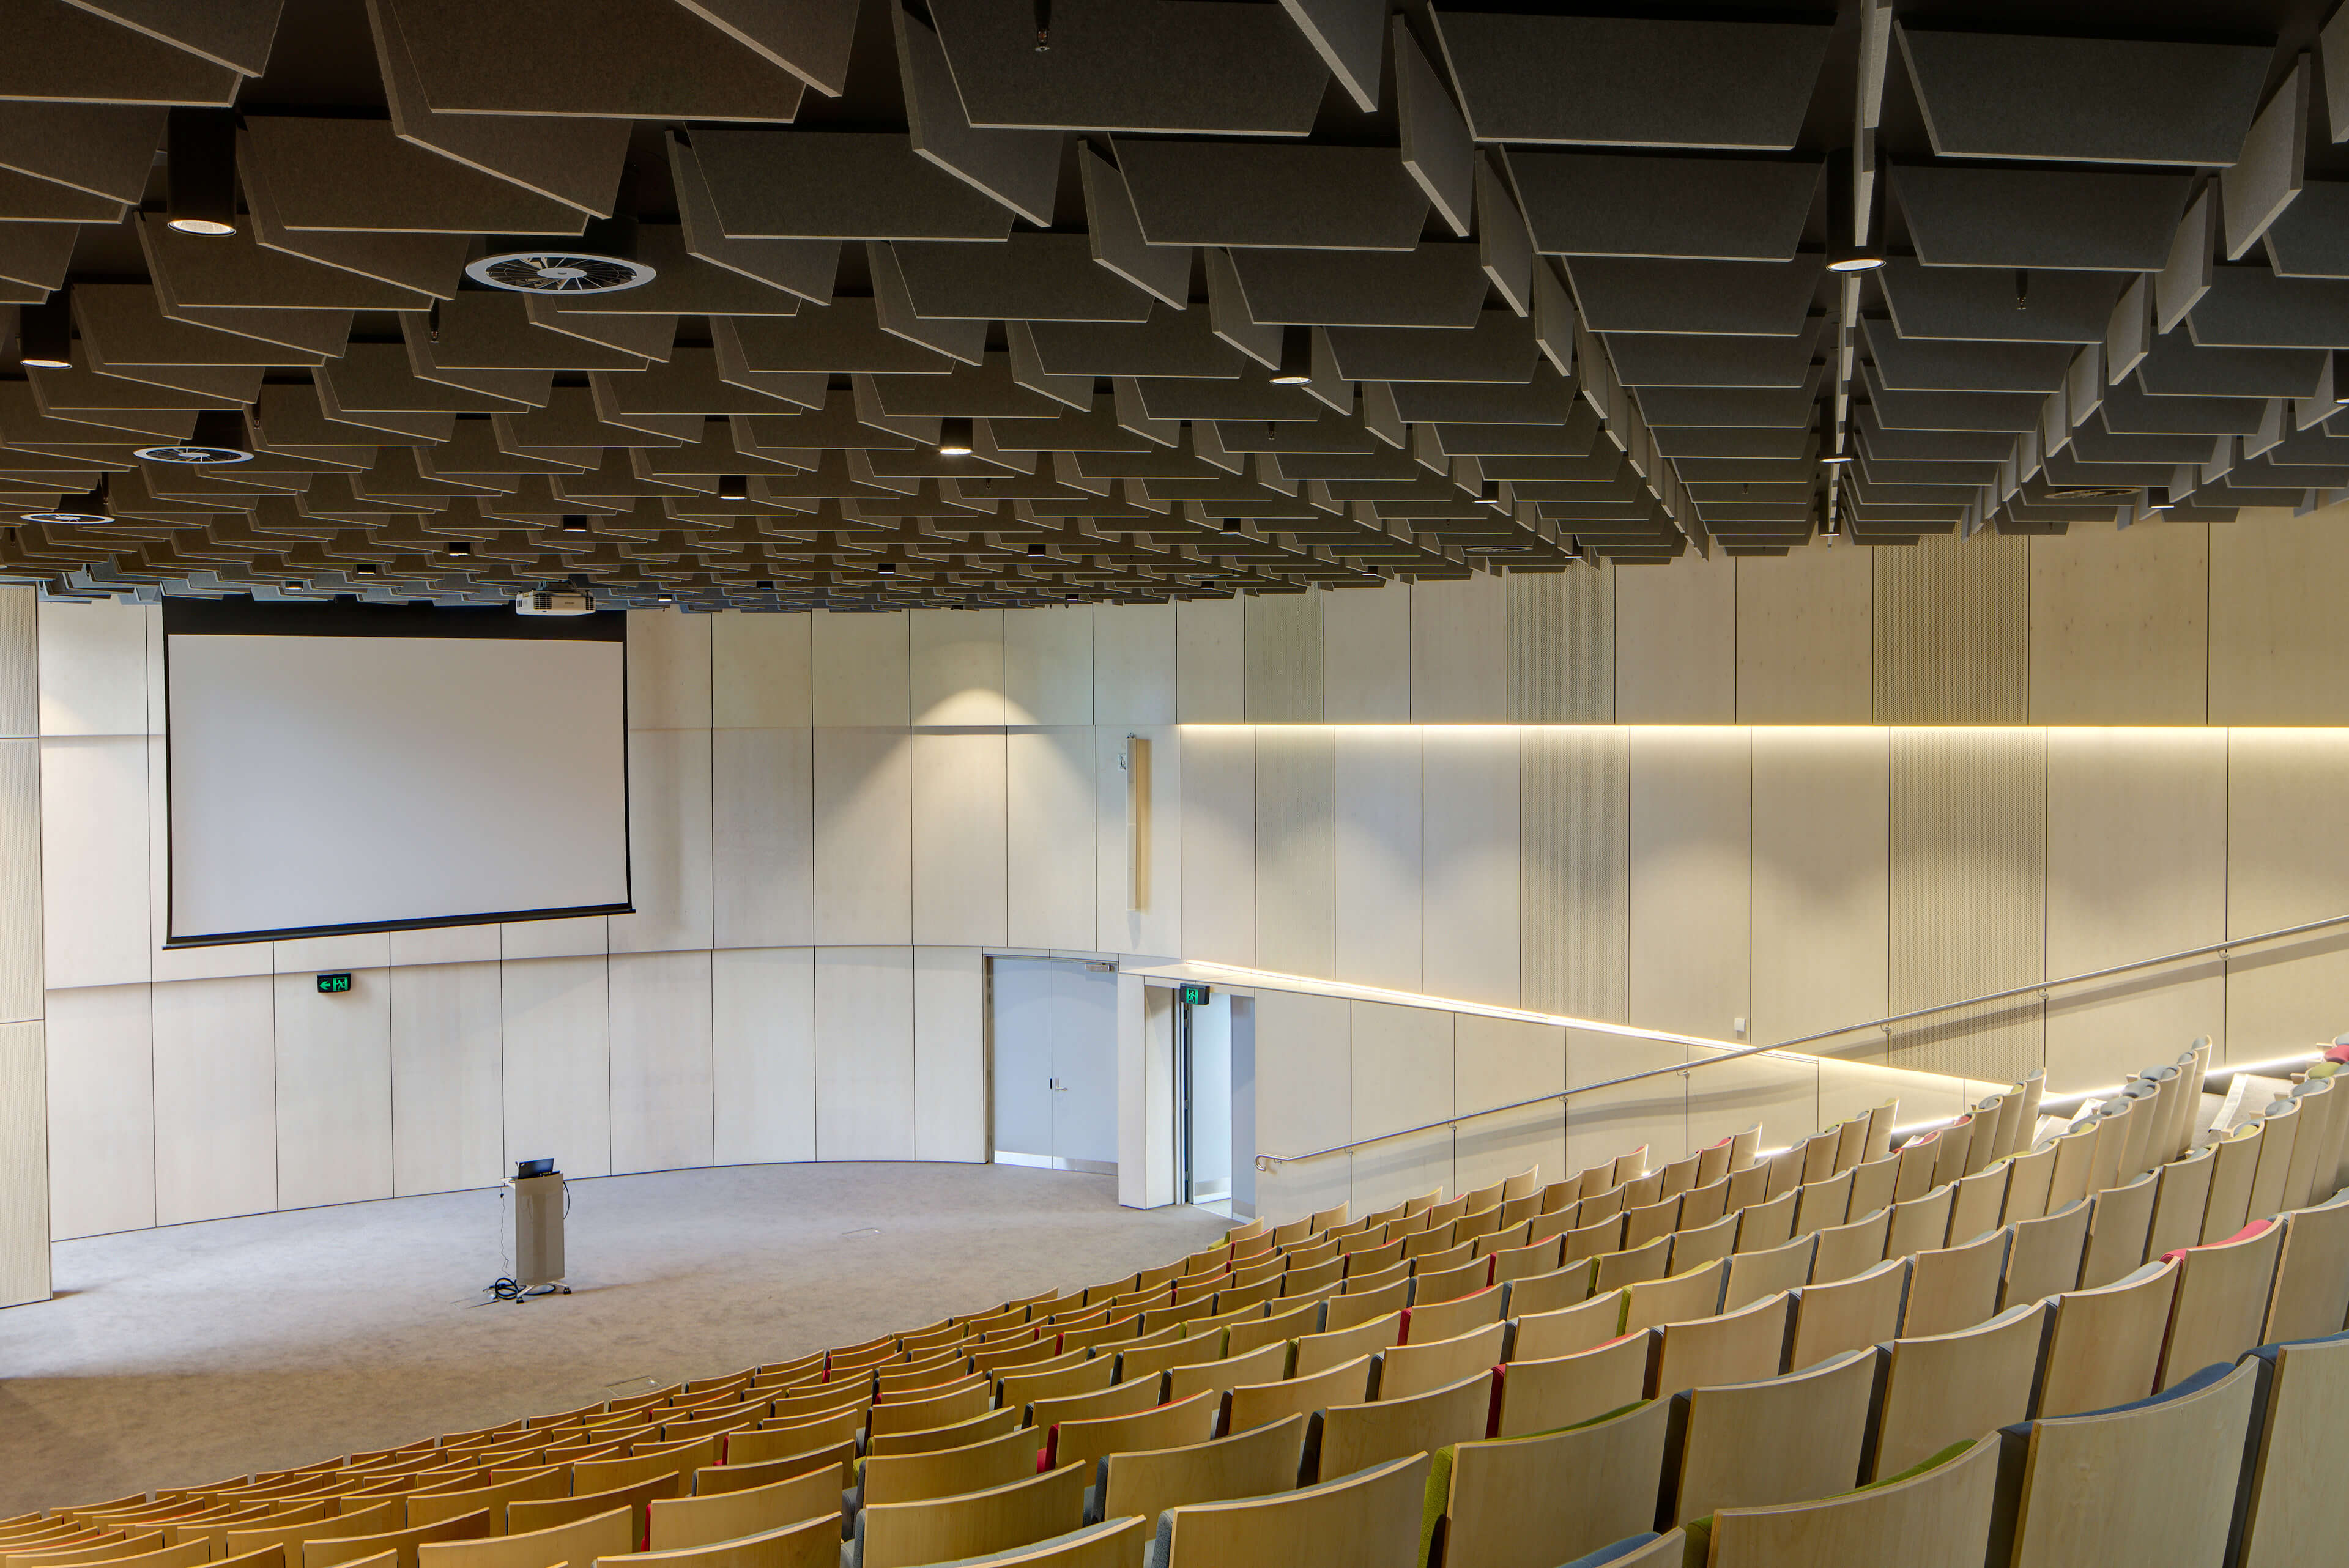 25 interior overview of lecture theatre stage and seating taronga zoo institute sydney taylor construction education